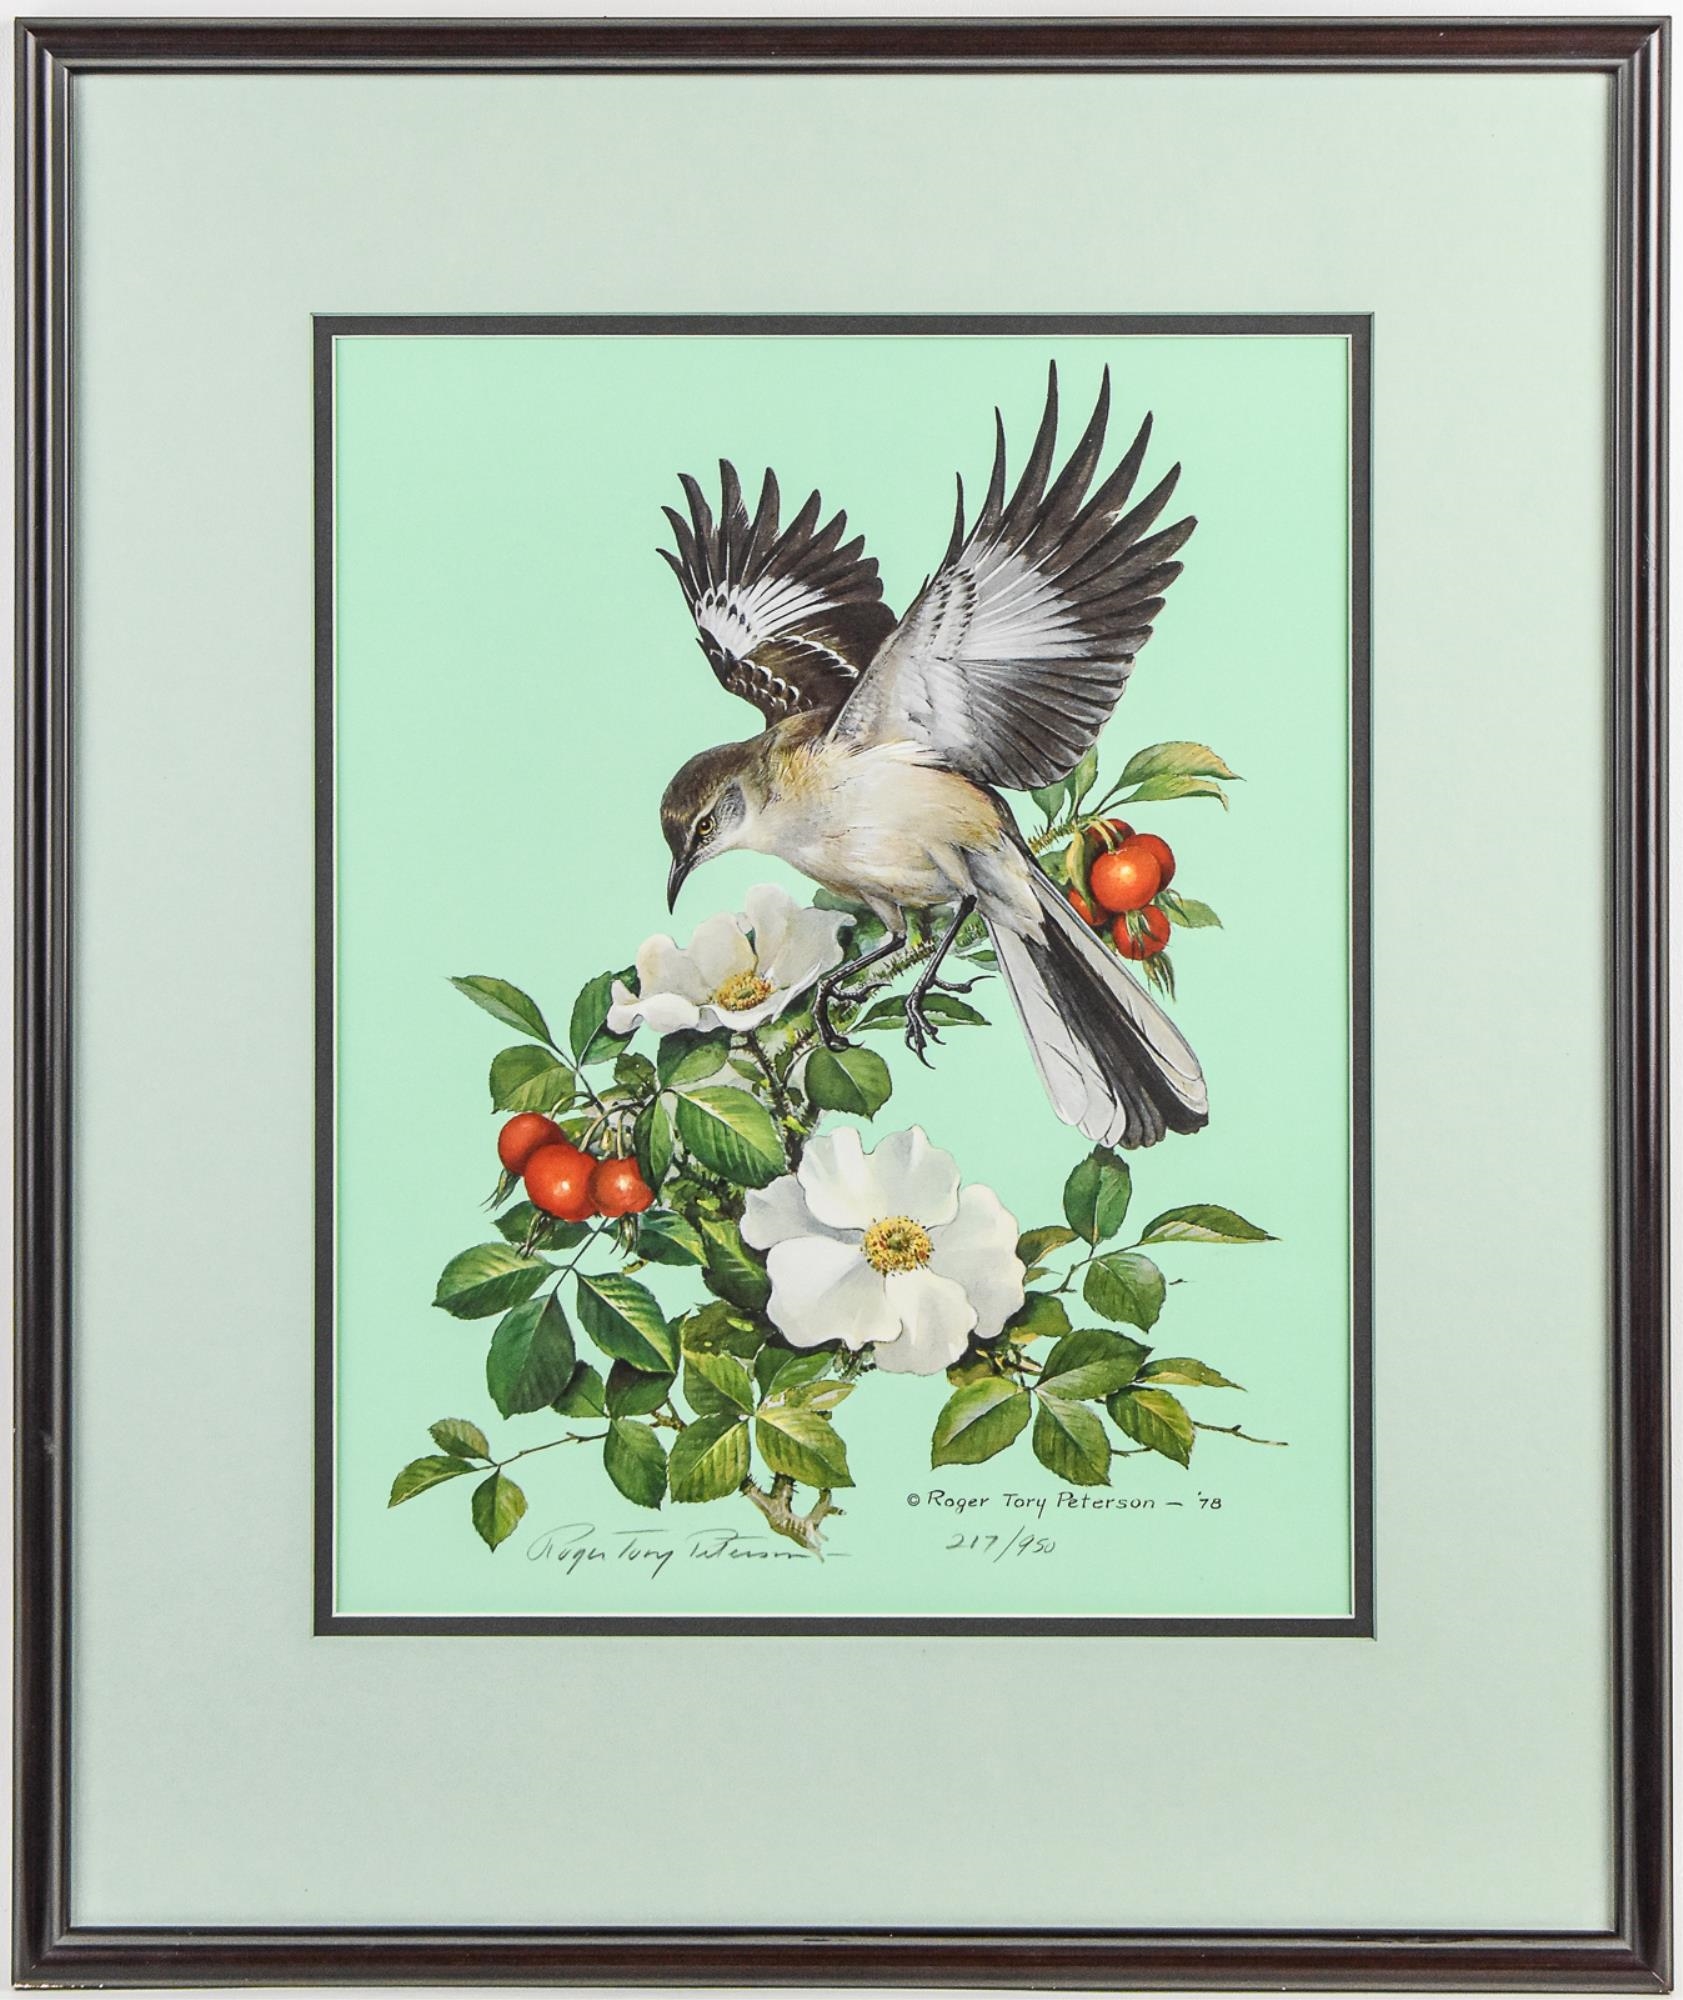 Artwork by Roger Tory Peterson, "MOCKINGBIRD", Made of lithographic print